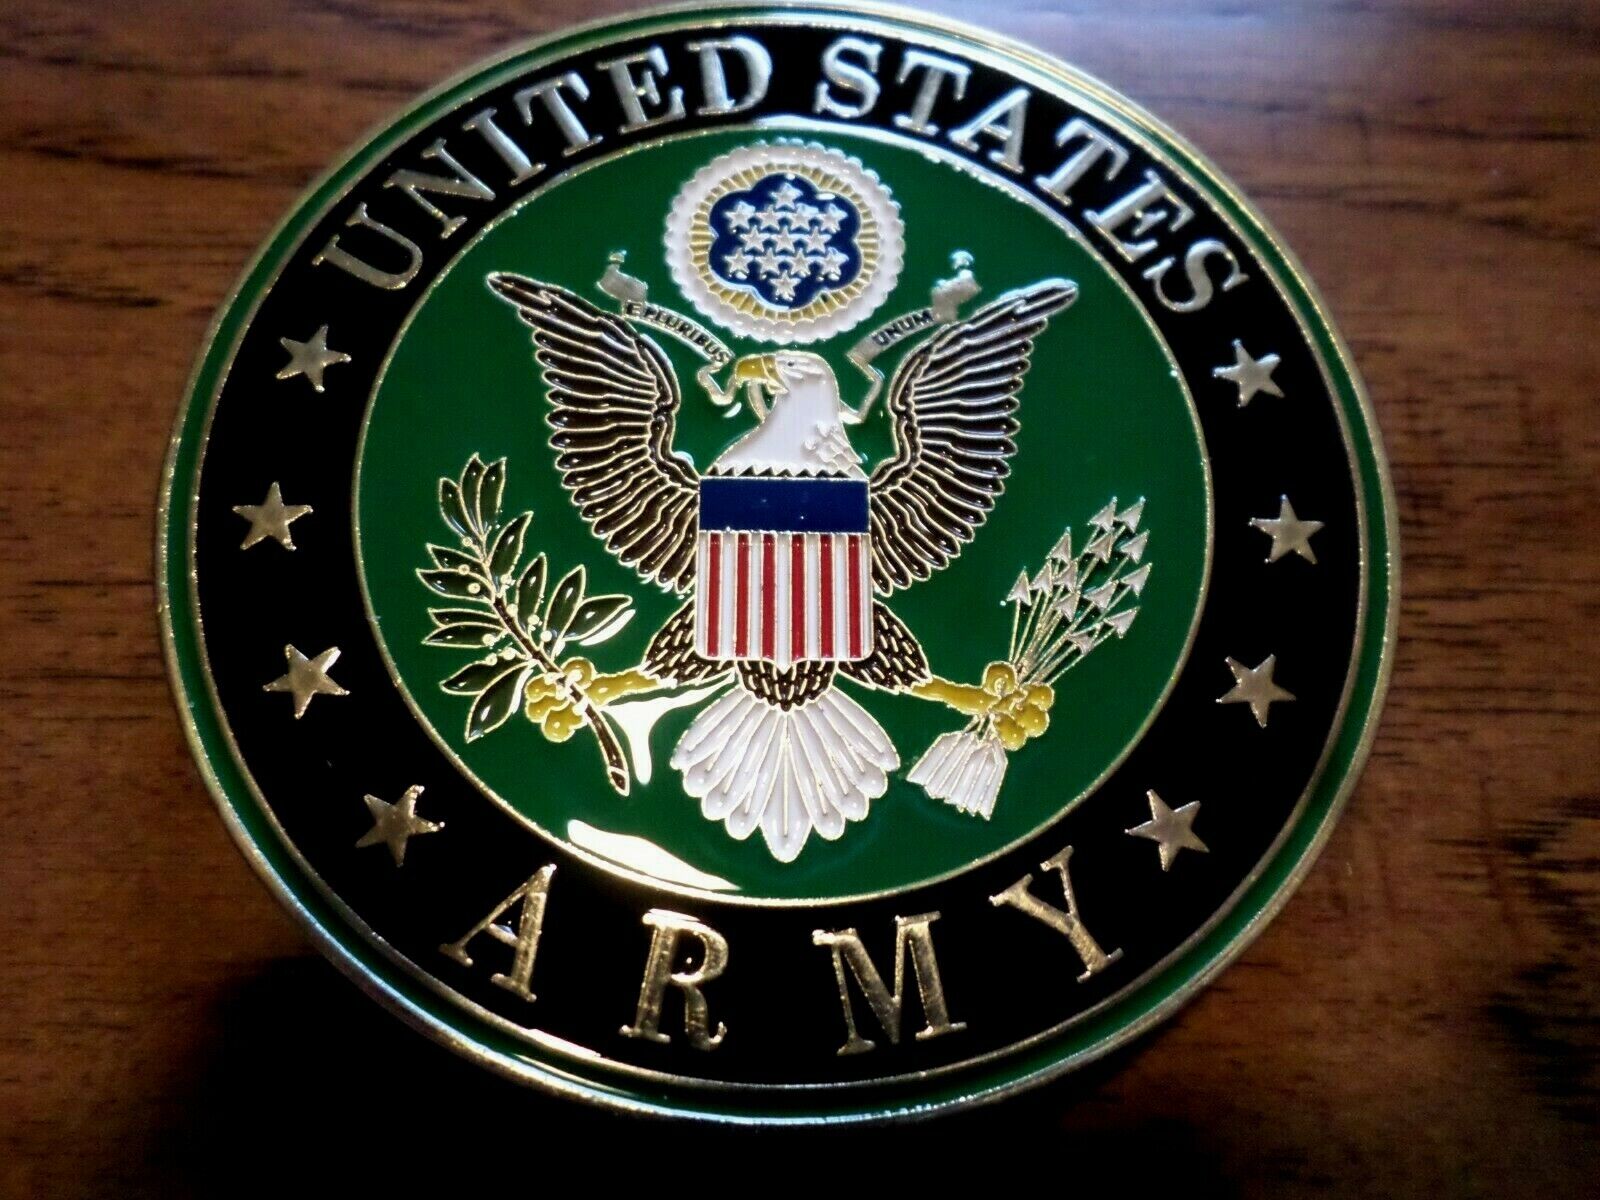 U.S ARMY AUTOMOBILE GRILL BADGE ALL WEATHER EMBLEM AUTO HOME MEDALLION 